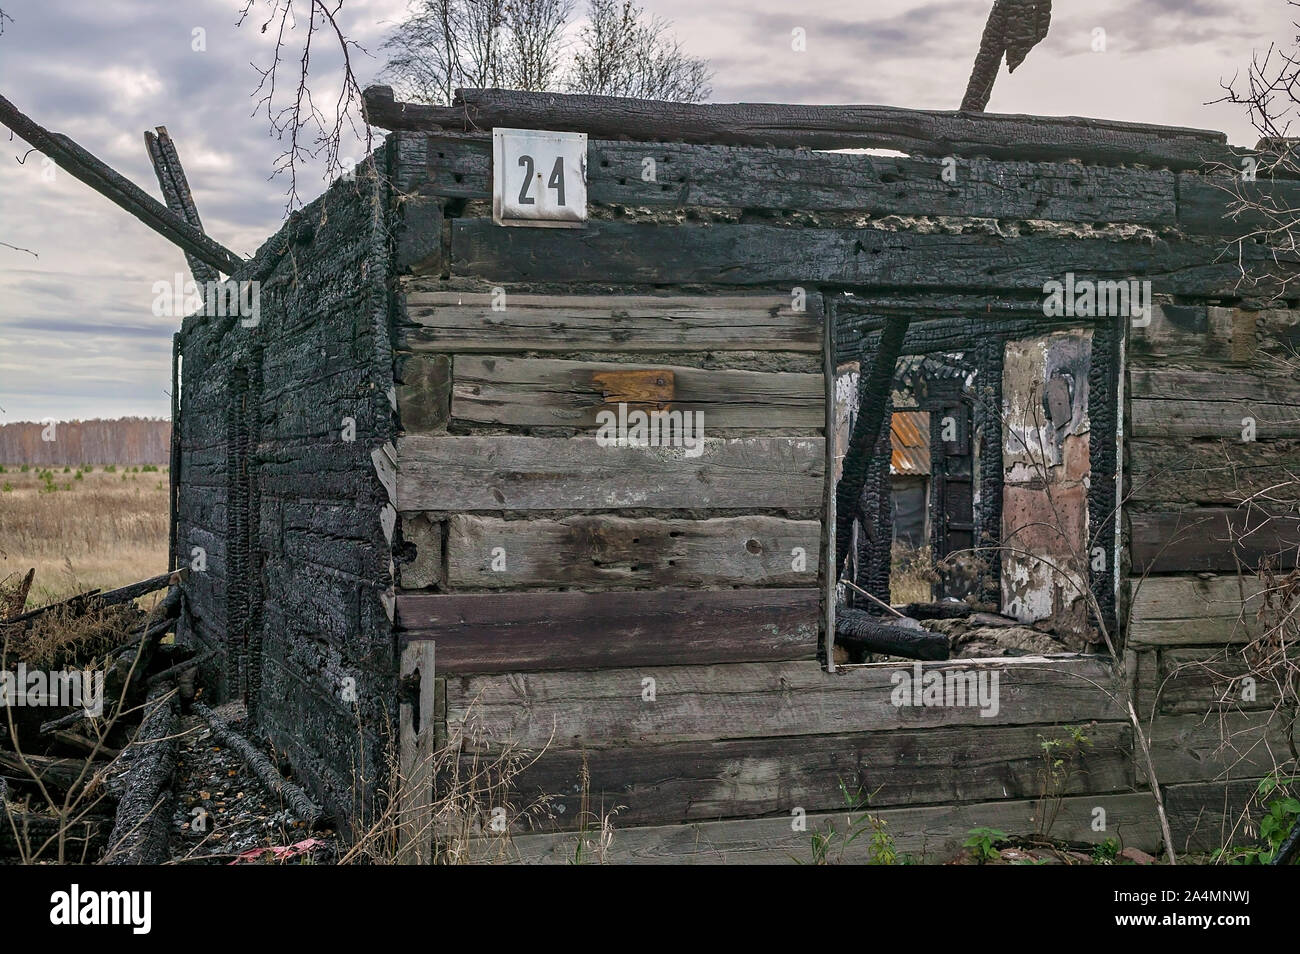 Burnt wooden house number 24. Destroyed roof and windows, charred walls. Horizontal shot Stock Photo